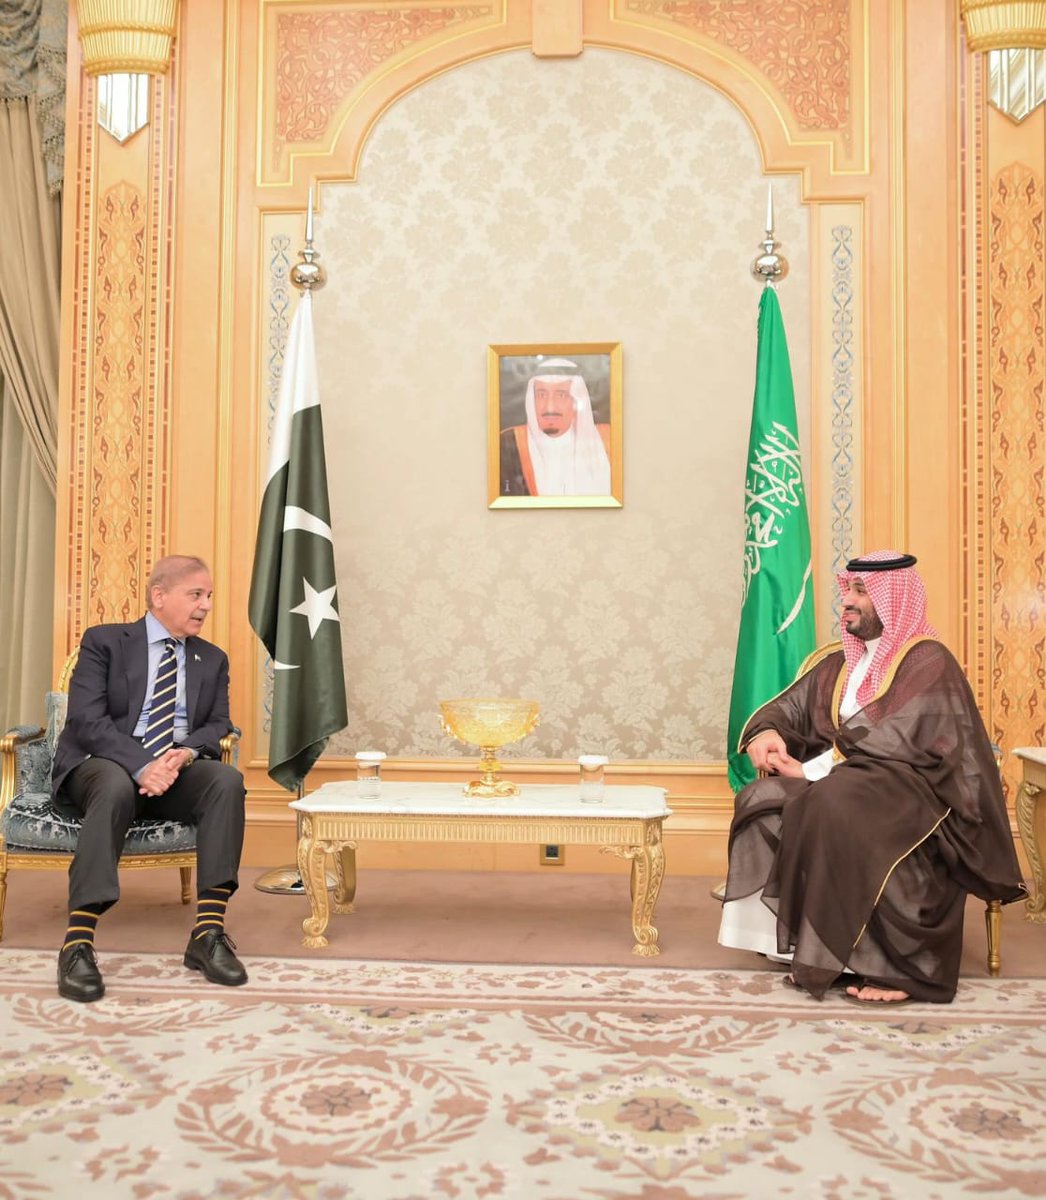 The anticipated impact of PM Shehbaz Sharif's meeting with Saudi Crown Prince HRH Mohammed bin Salman on future investments in #Pakistan is expected to significantly bolster the country's economy. #PMLN aims to elevate Pakistan to the ranks of developed nations.